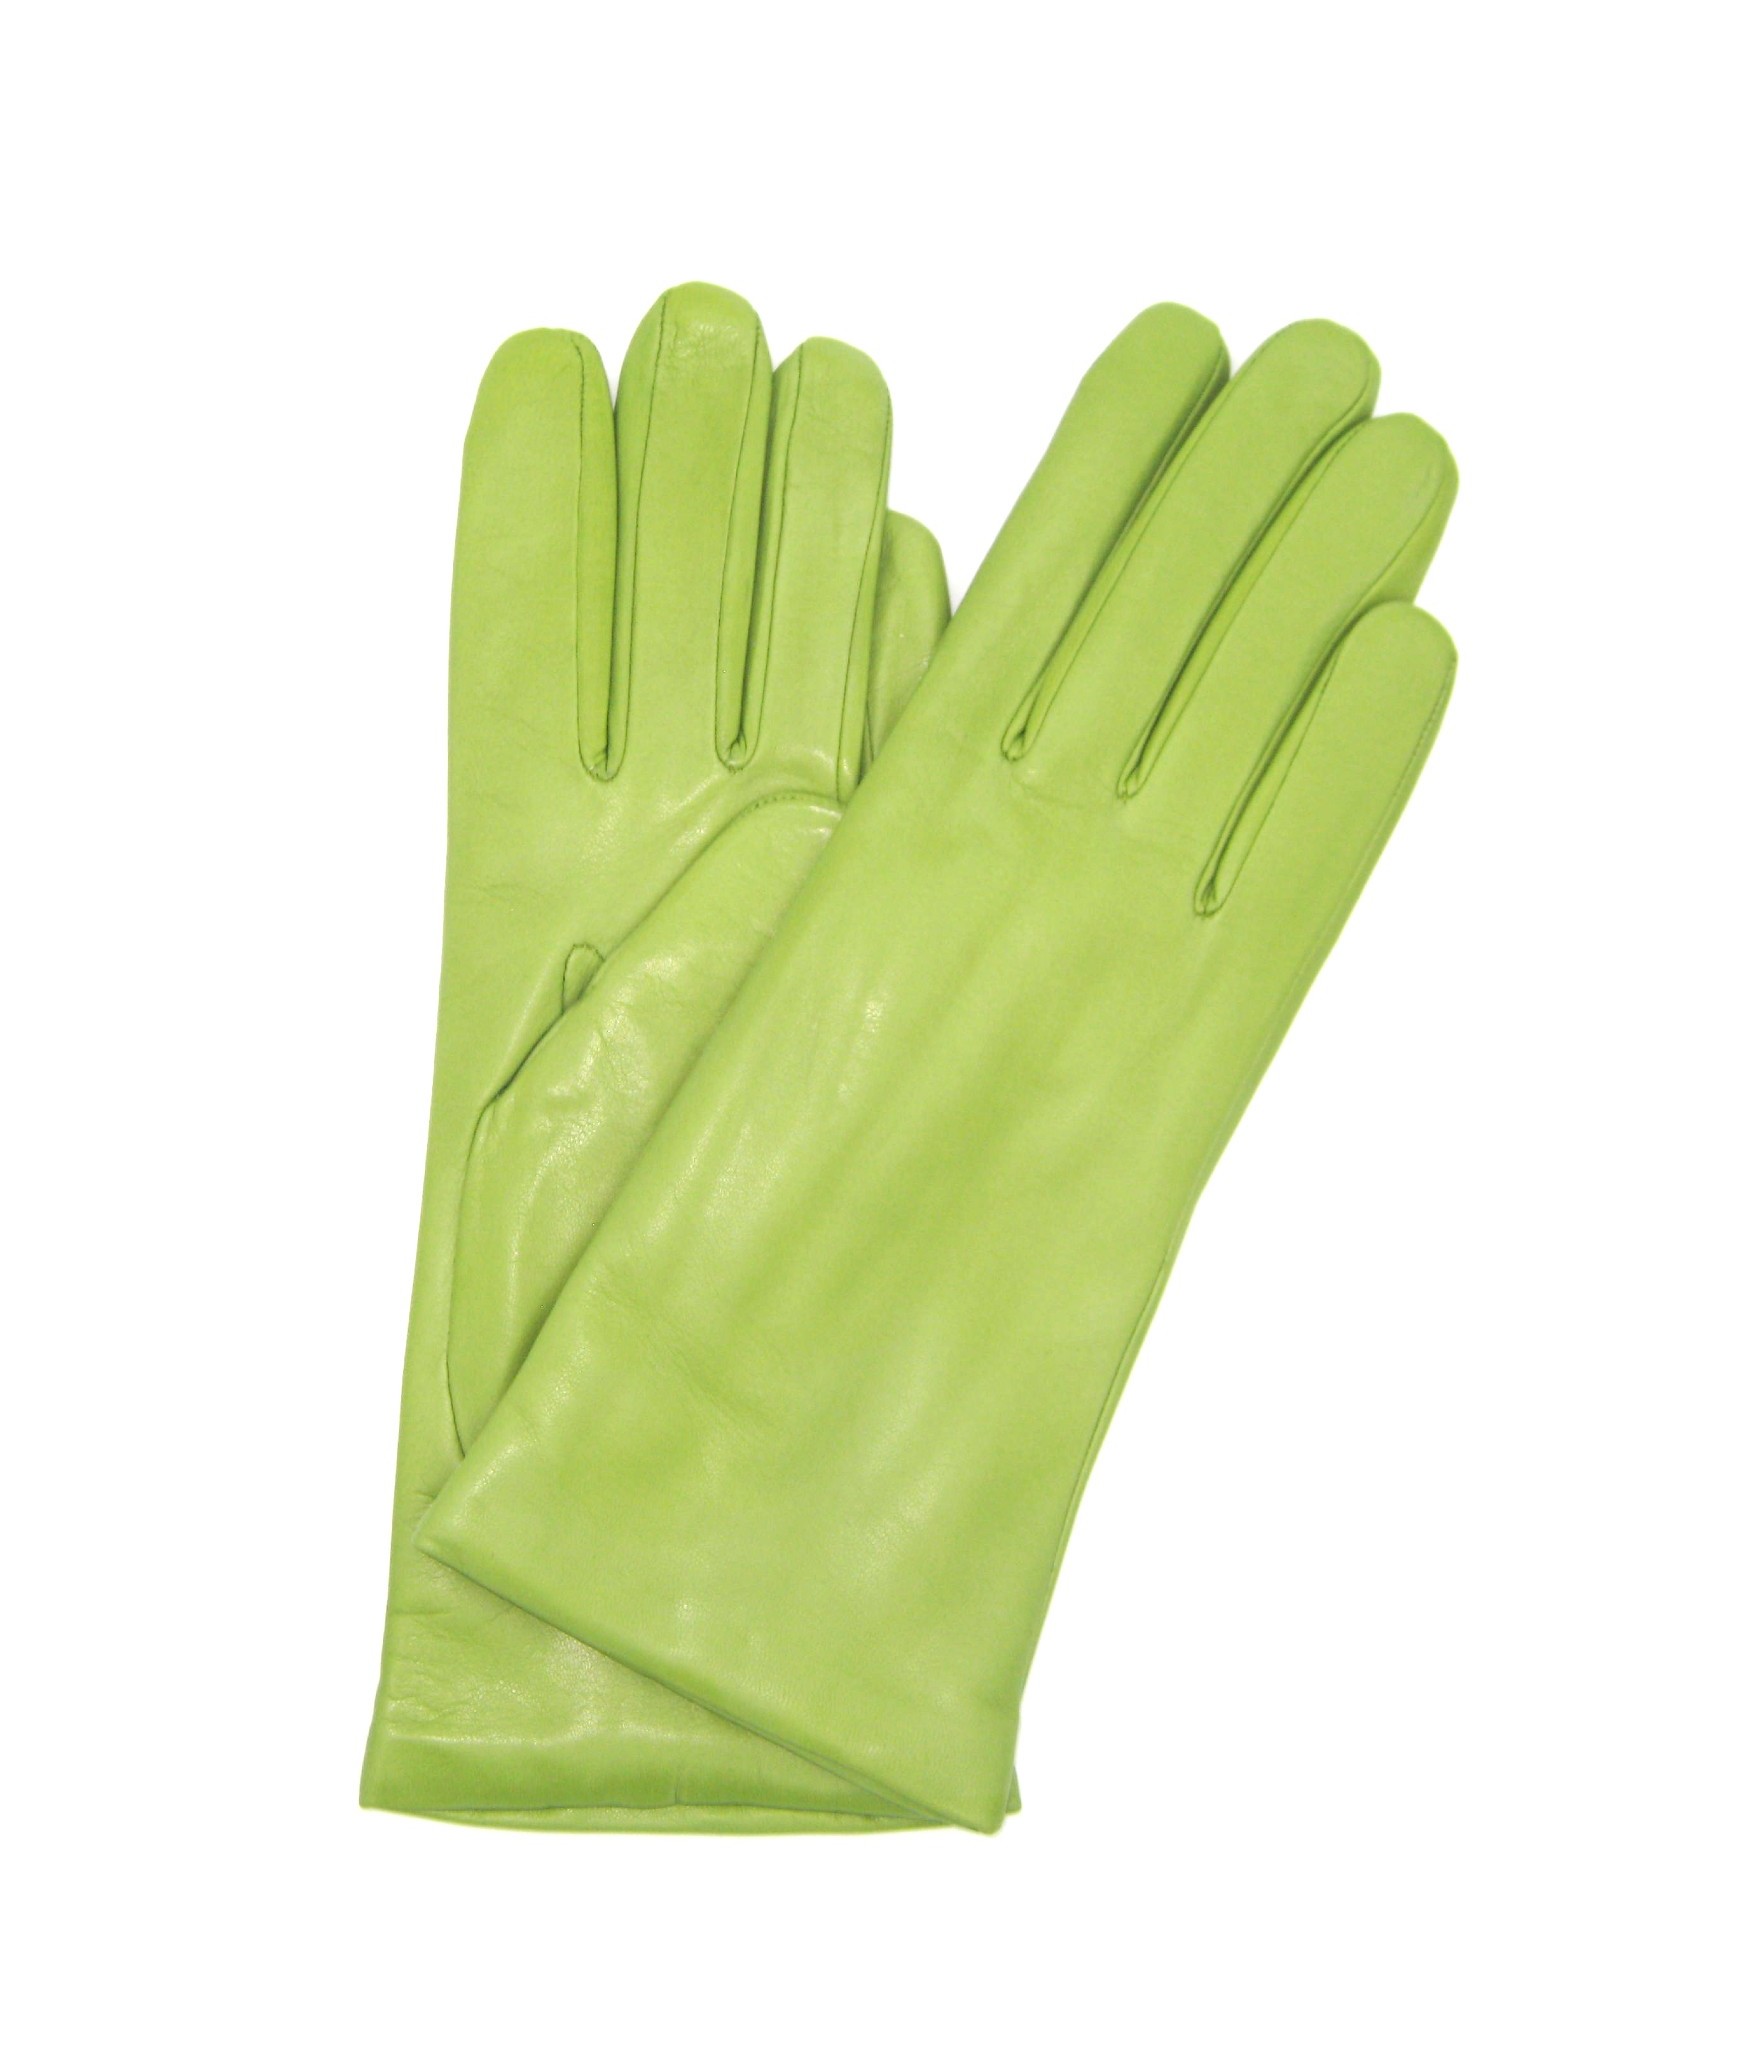 Nappa leather gloves  Cashmere lined    Pistachio Green